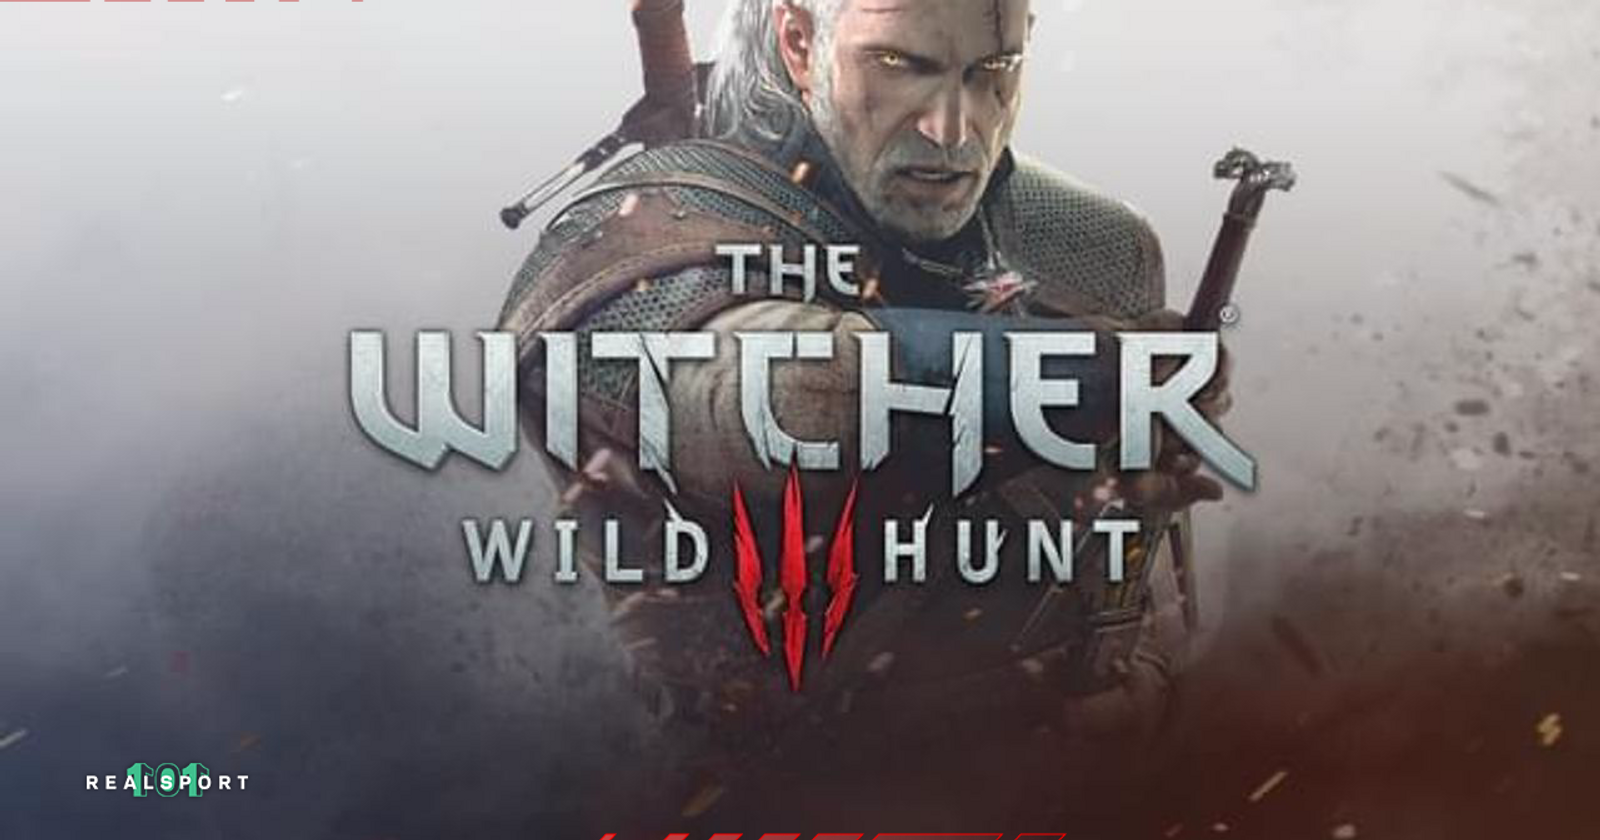 The Witcher 3 Is Coming To The Next Generation: Release Dates for PS5 and  Xbox One X - History-Computer